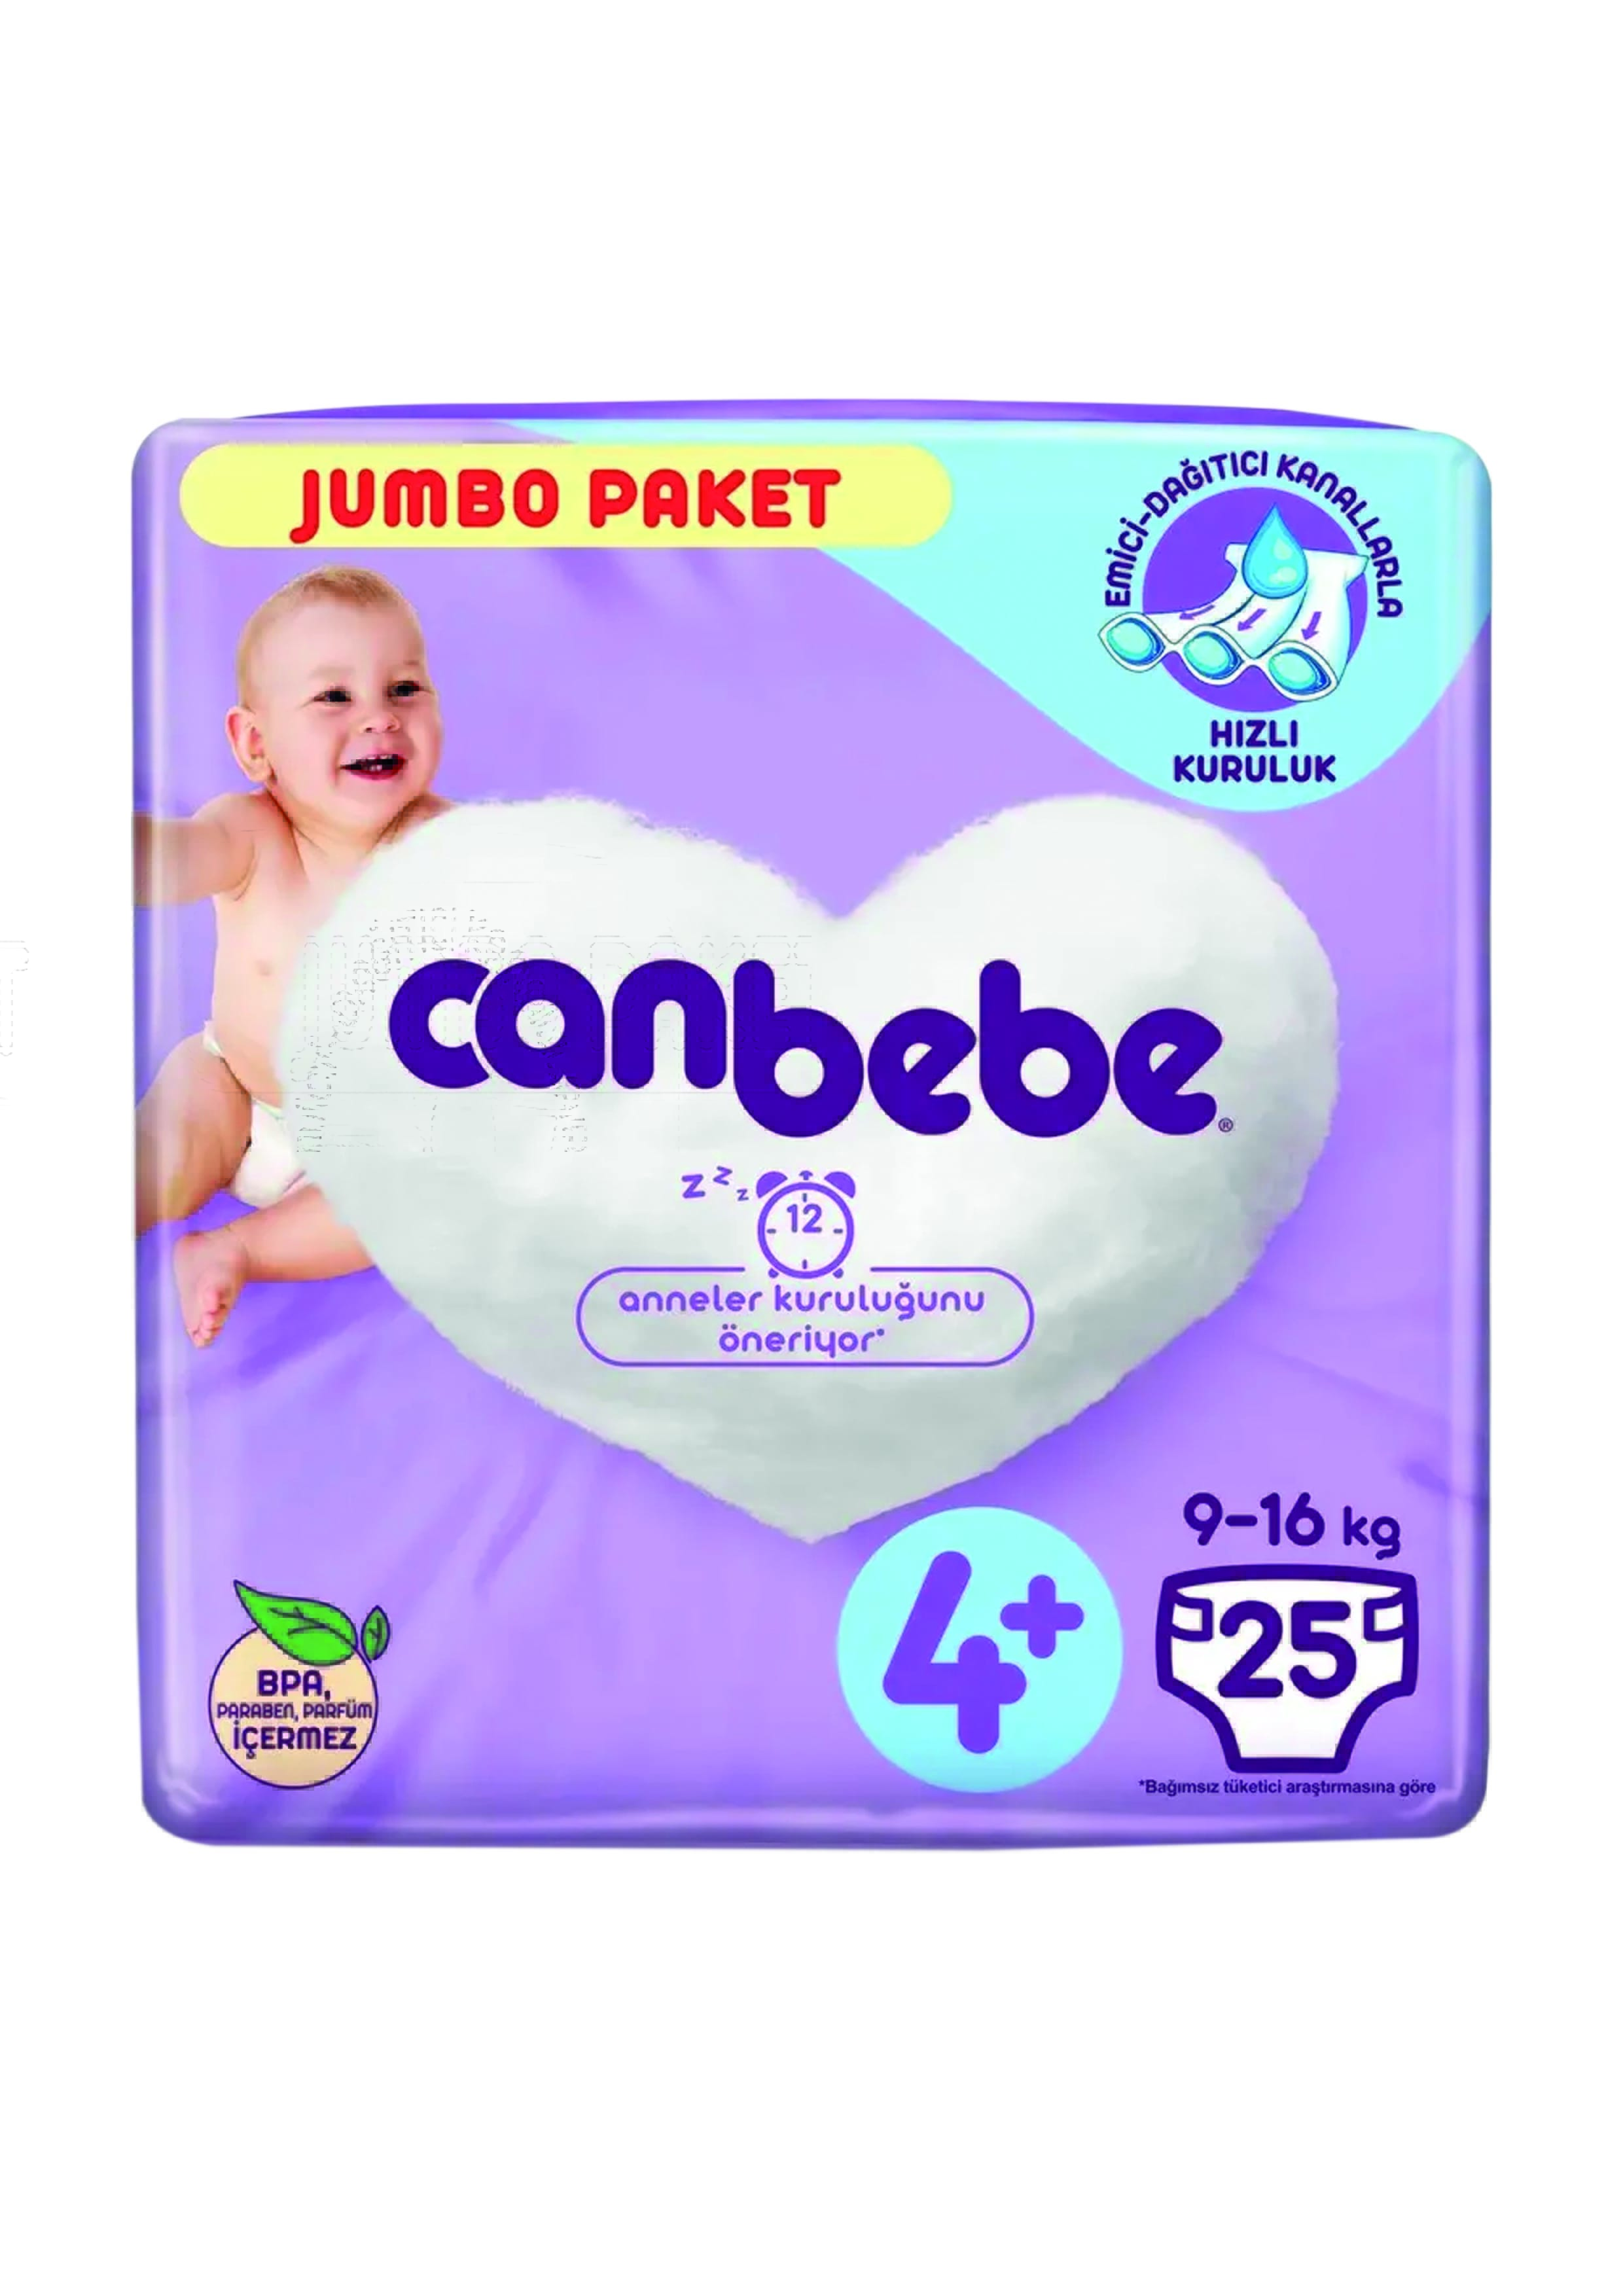 Canbebe Jumbo Package No 4+ 25 pc 